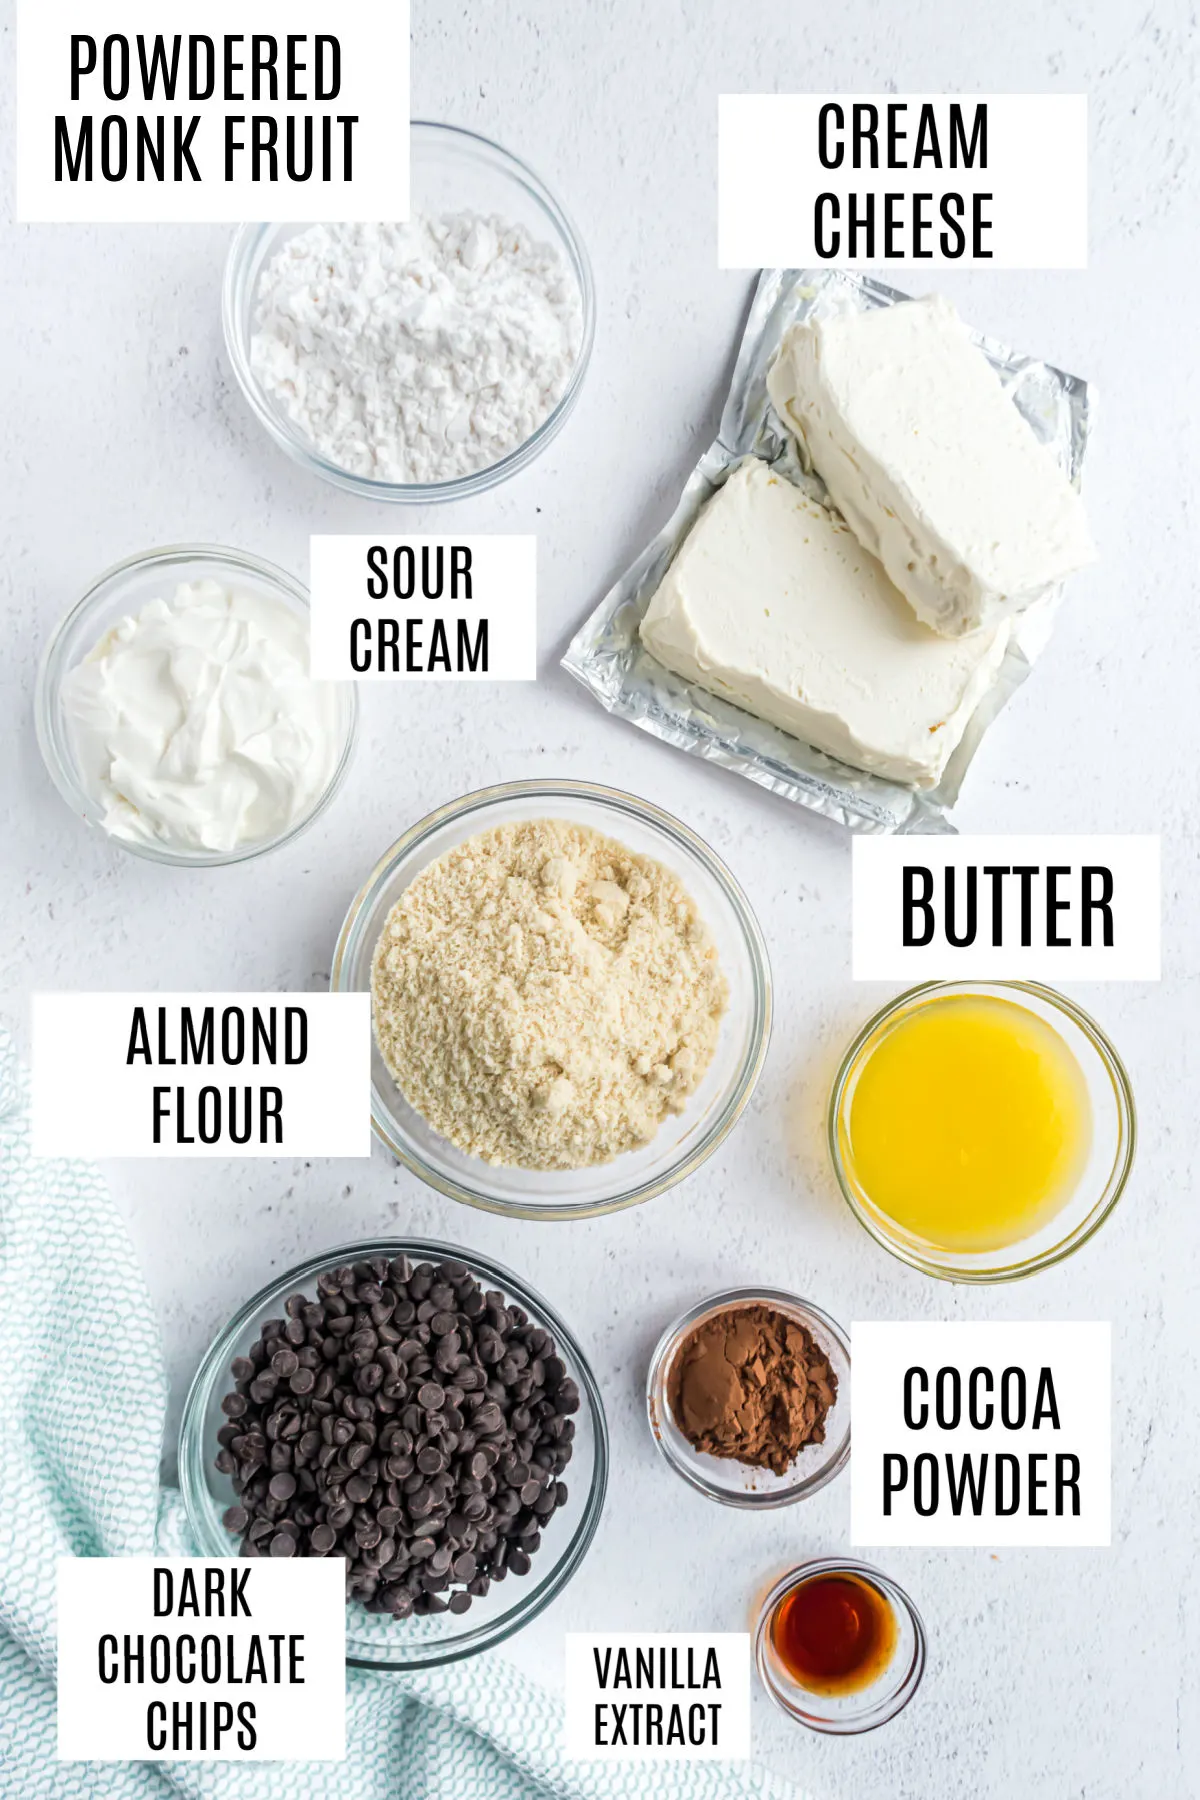 Ingredients needed for keto chocolate cheesecake recipe.